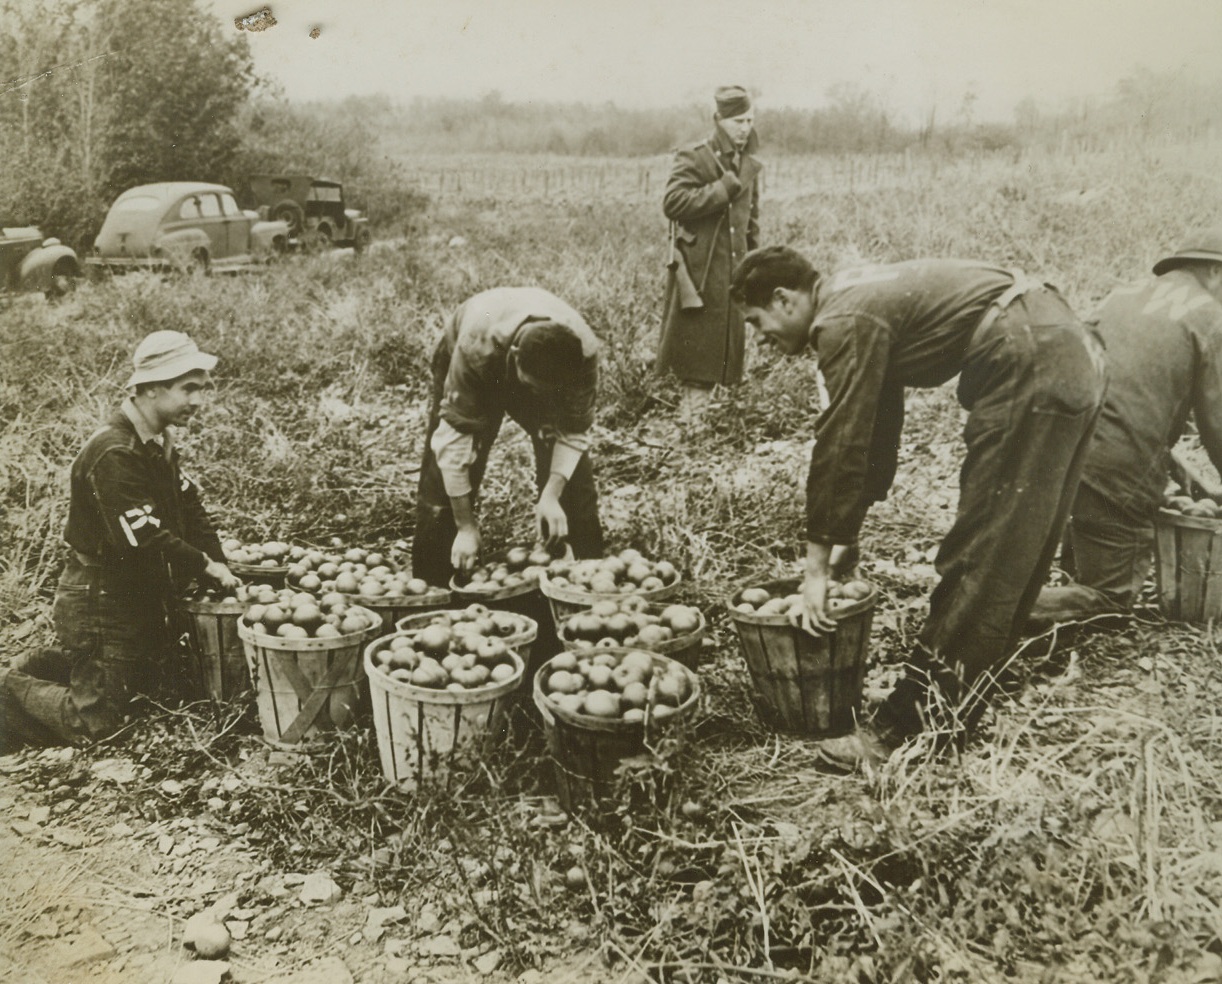 Italian Prisoners Put to Work on Farms, 10/25/1943. FREDONIA, N.Y. -- Italian prisoners of war make no trouble for their armed Yank guard as they harvest a late tomato crop on the William Russo farm near Fredonia, Chautaqu County, N.Y. Several groups of the ex-Mussolini fighters are helping relieve the manpower shortages in rural America this year.  Credit Line (ACME);